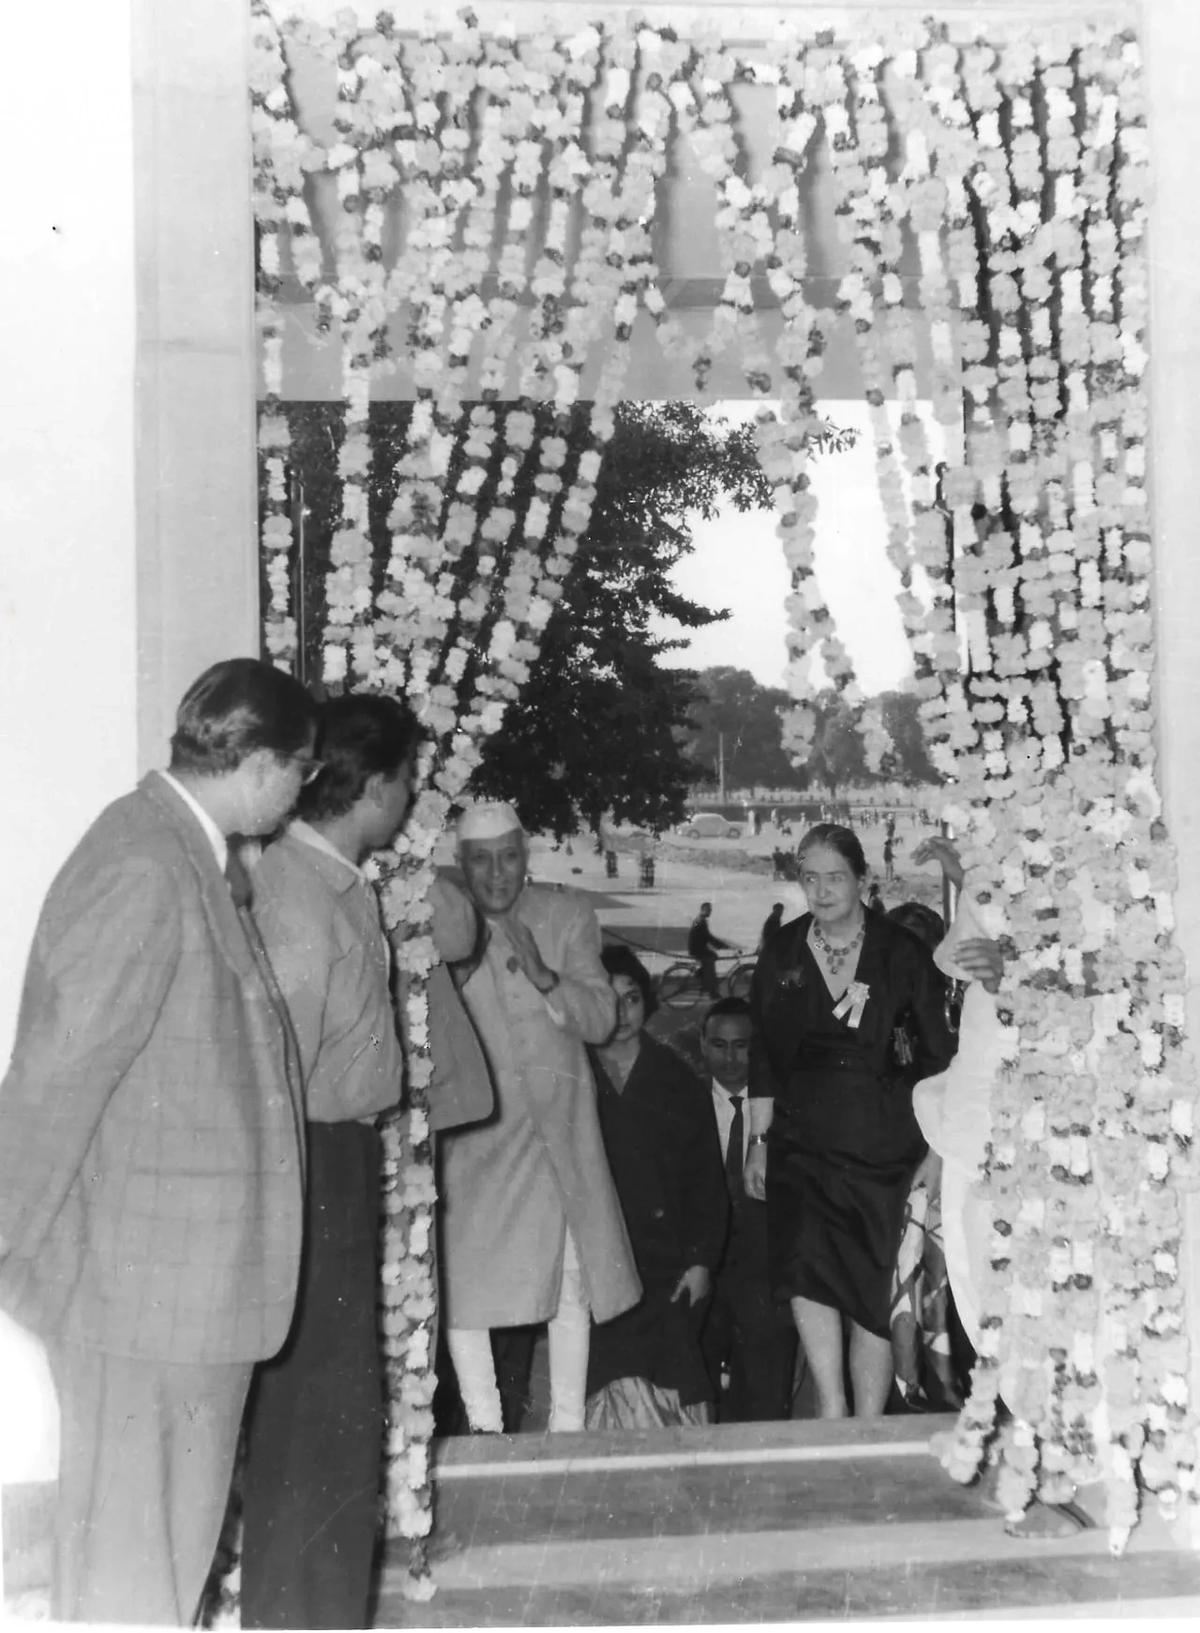 Jawaharlal Nehru and Grace Morley at the opening of the National Museum in December 1960. With no walls or barriers, the cyclist in the background shows the access citizens had in those days